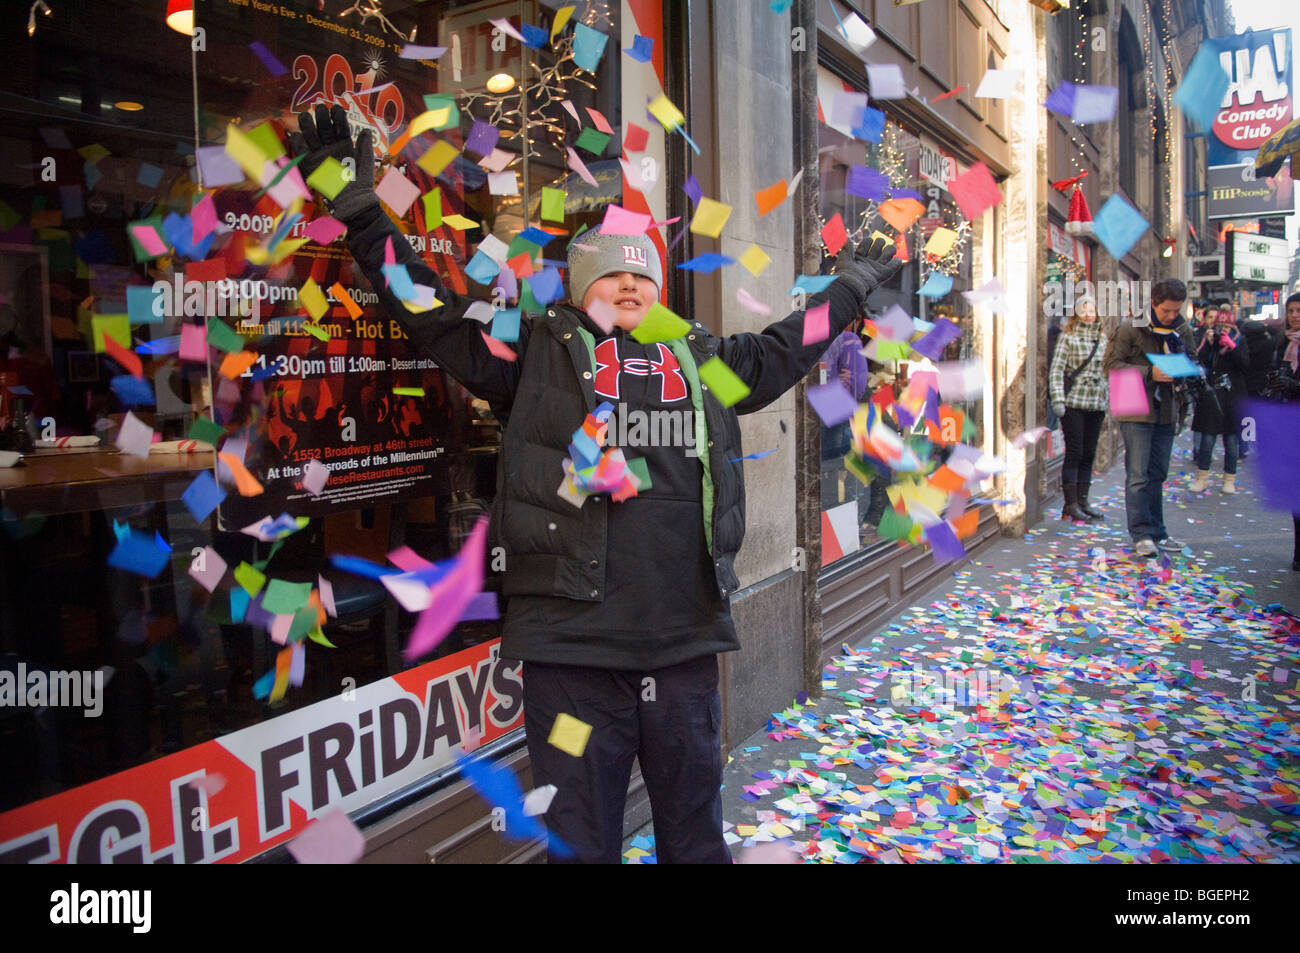 Confetti to be used in Times Square during New Year's Eve is given a flight test in Times Square in New York Stock Photo